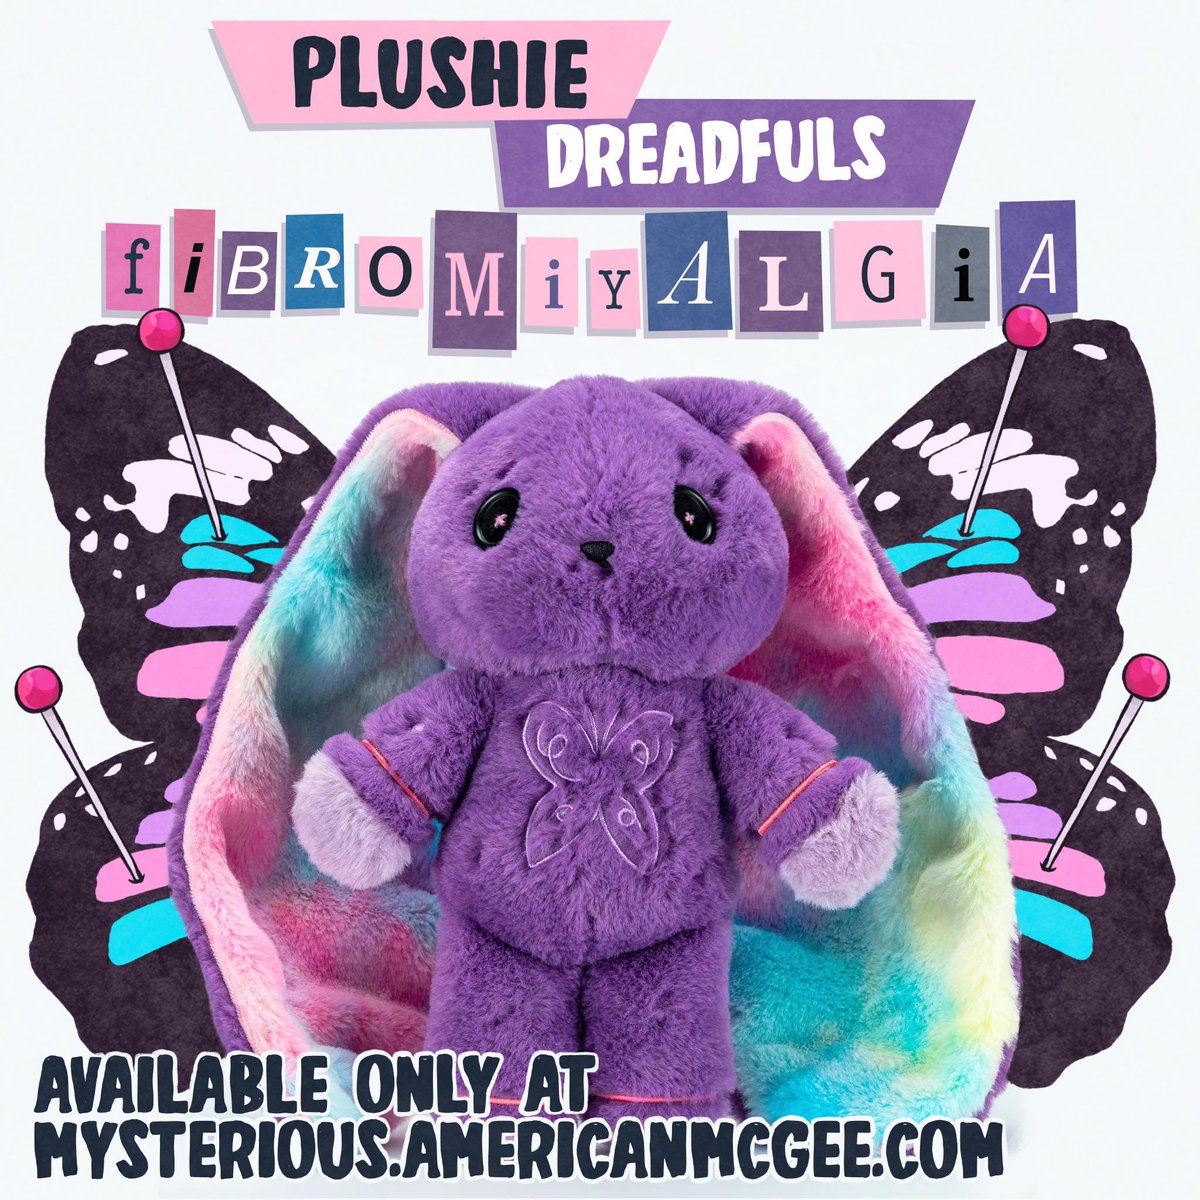 Even my FUR hurts! #Fibromyalgia #cfs #ChronicPain 
mysterious.americanmcgee.com/products/plush…